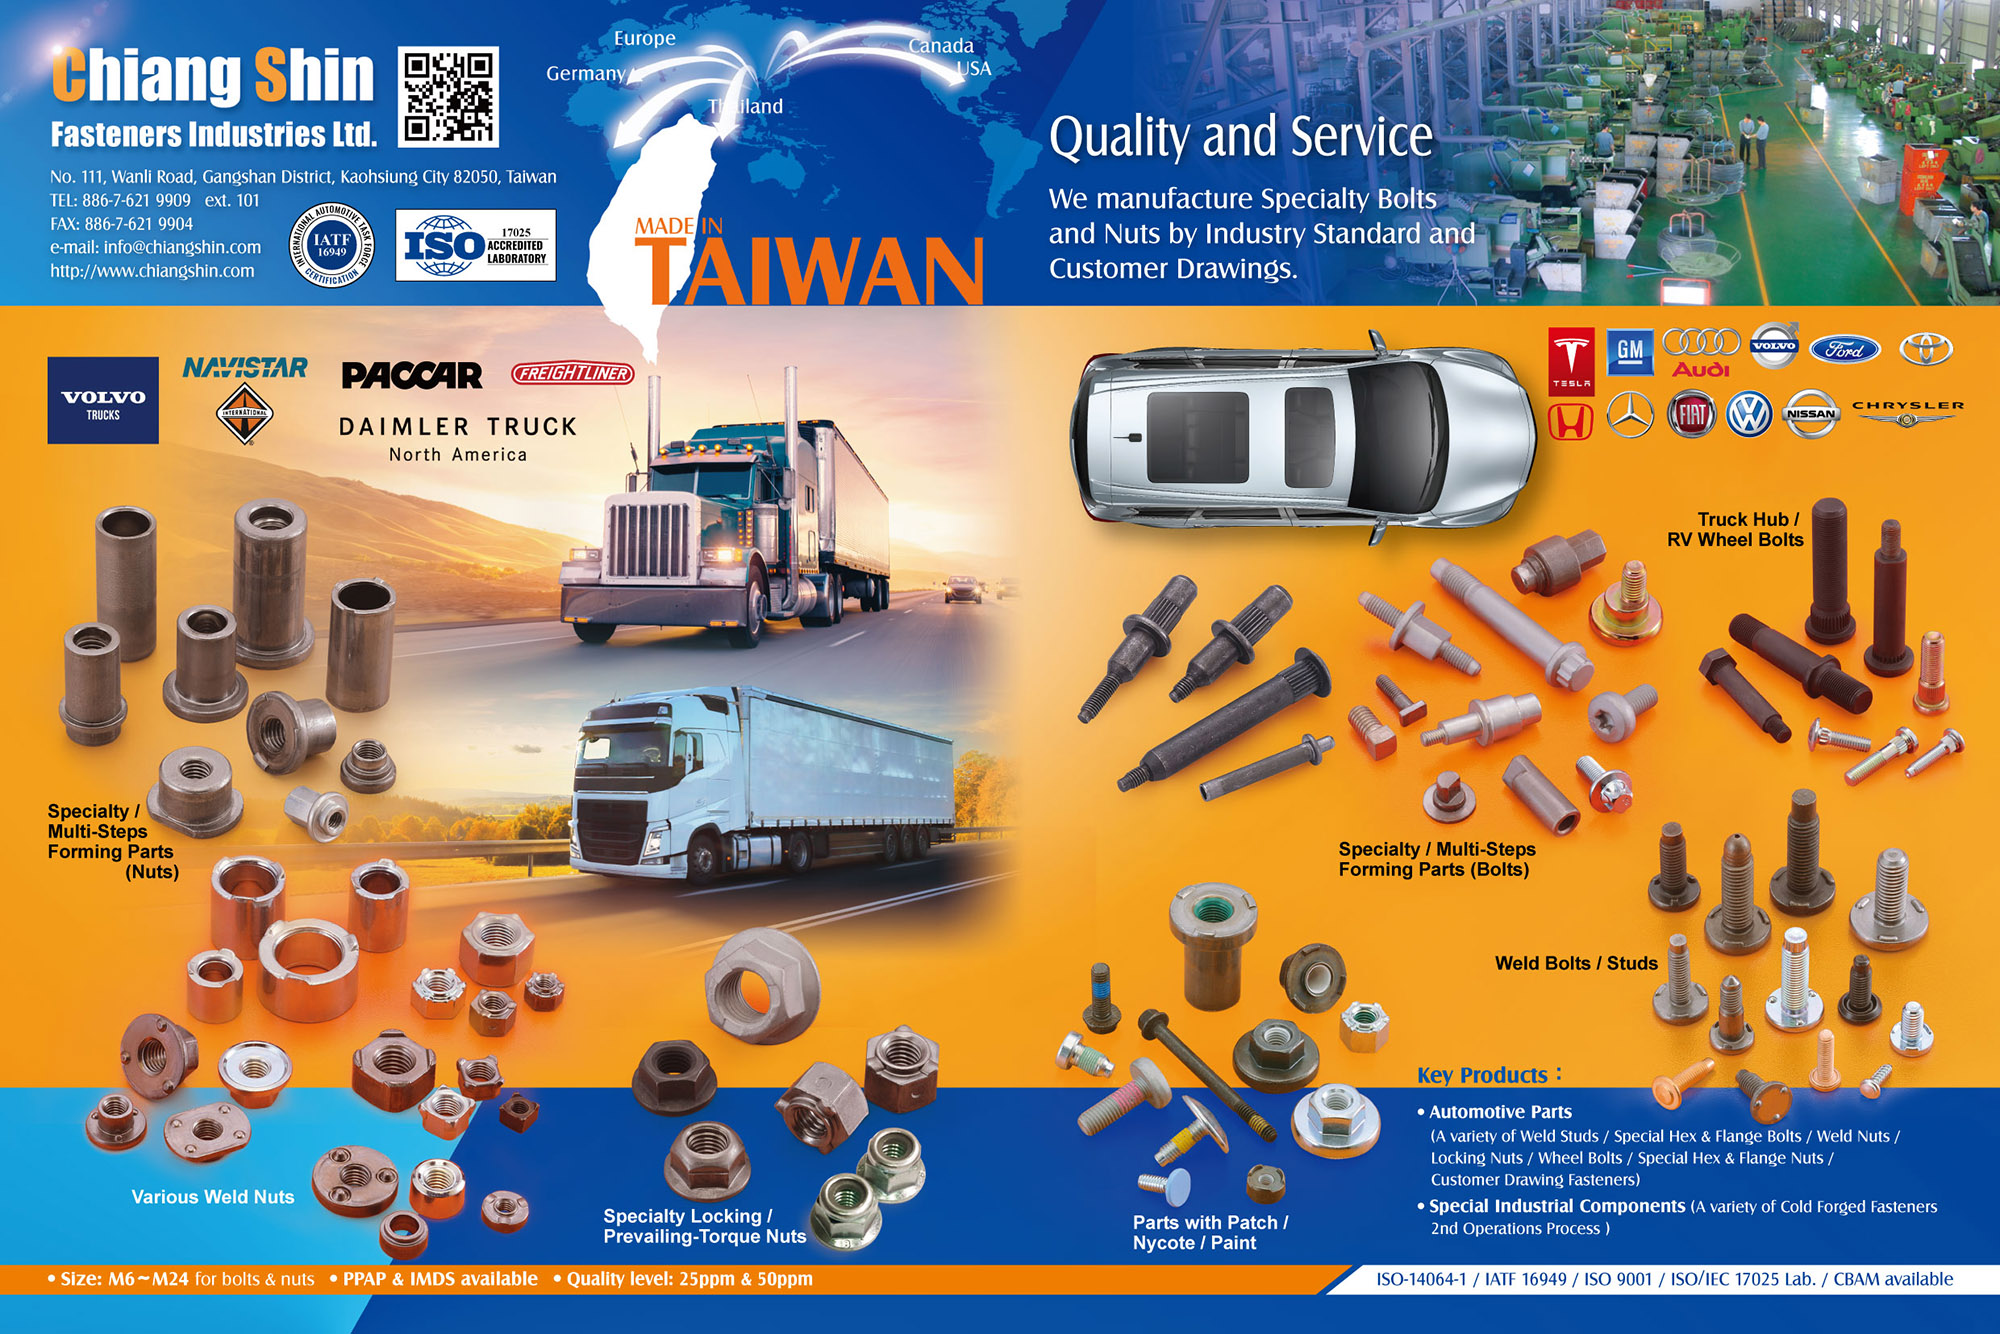 CHIANG SHIN FASTENERS INDUSTRIES LTD.  , Specialty/Multi-steps Forming Parts (Nuts), Weld Nuts, Specialty Locking / Prevaling-Torque Nuts, Truck Hub / RV Wheel Bolts, Specialty / Multi-Steps Forming Parts (Bolts), Parts with Patch / Nycote / Paint, Truck Hub / RV Wheel Bolts, Specialty / Multi-Steps Forming Parts (Bolts), Weld Bolts / Studs